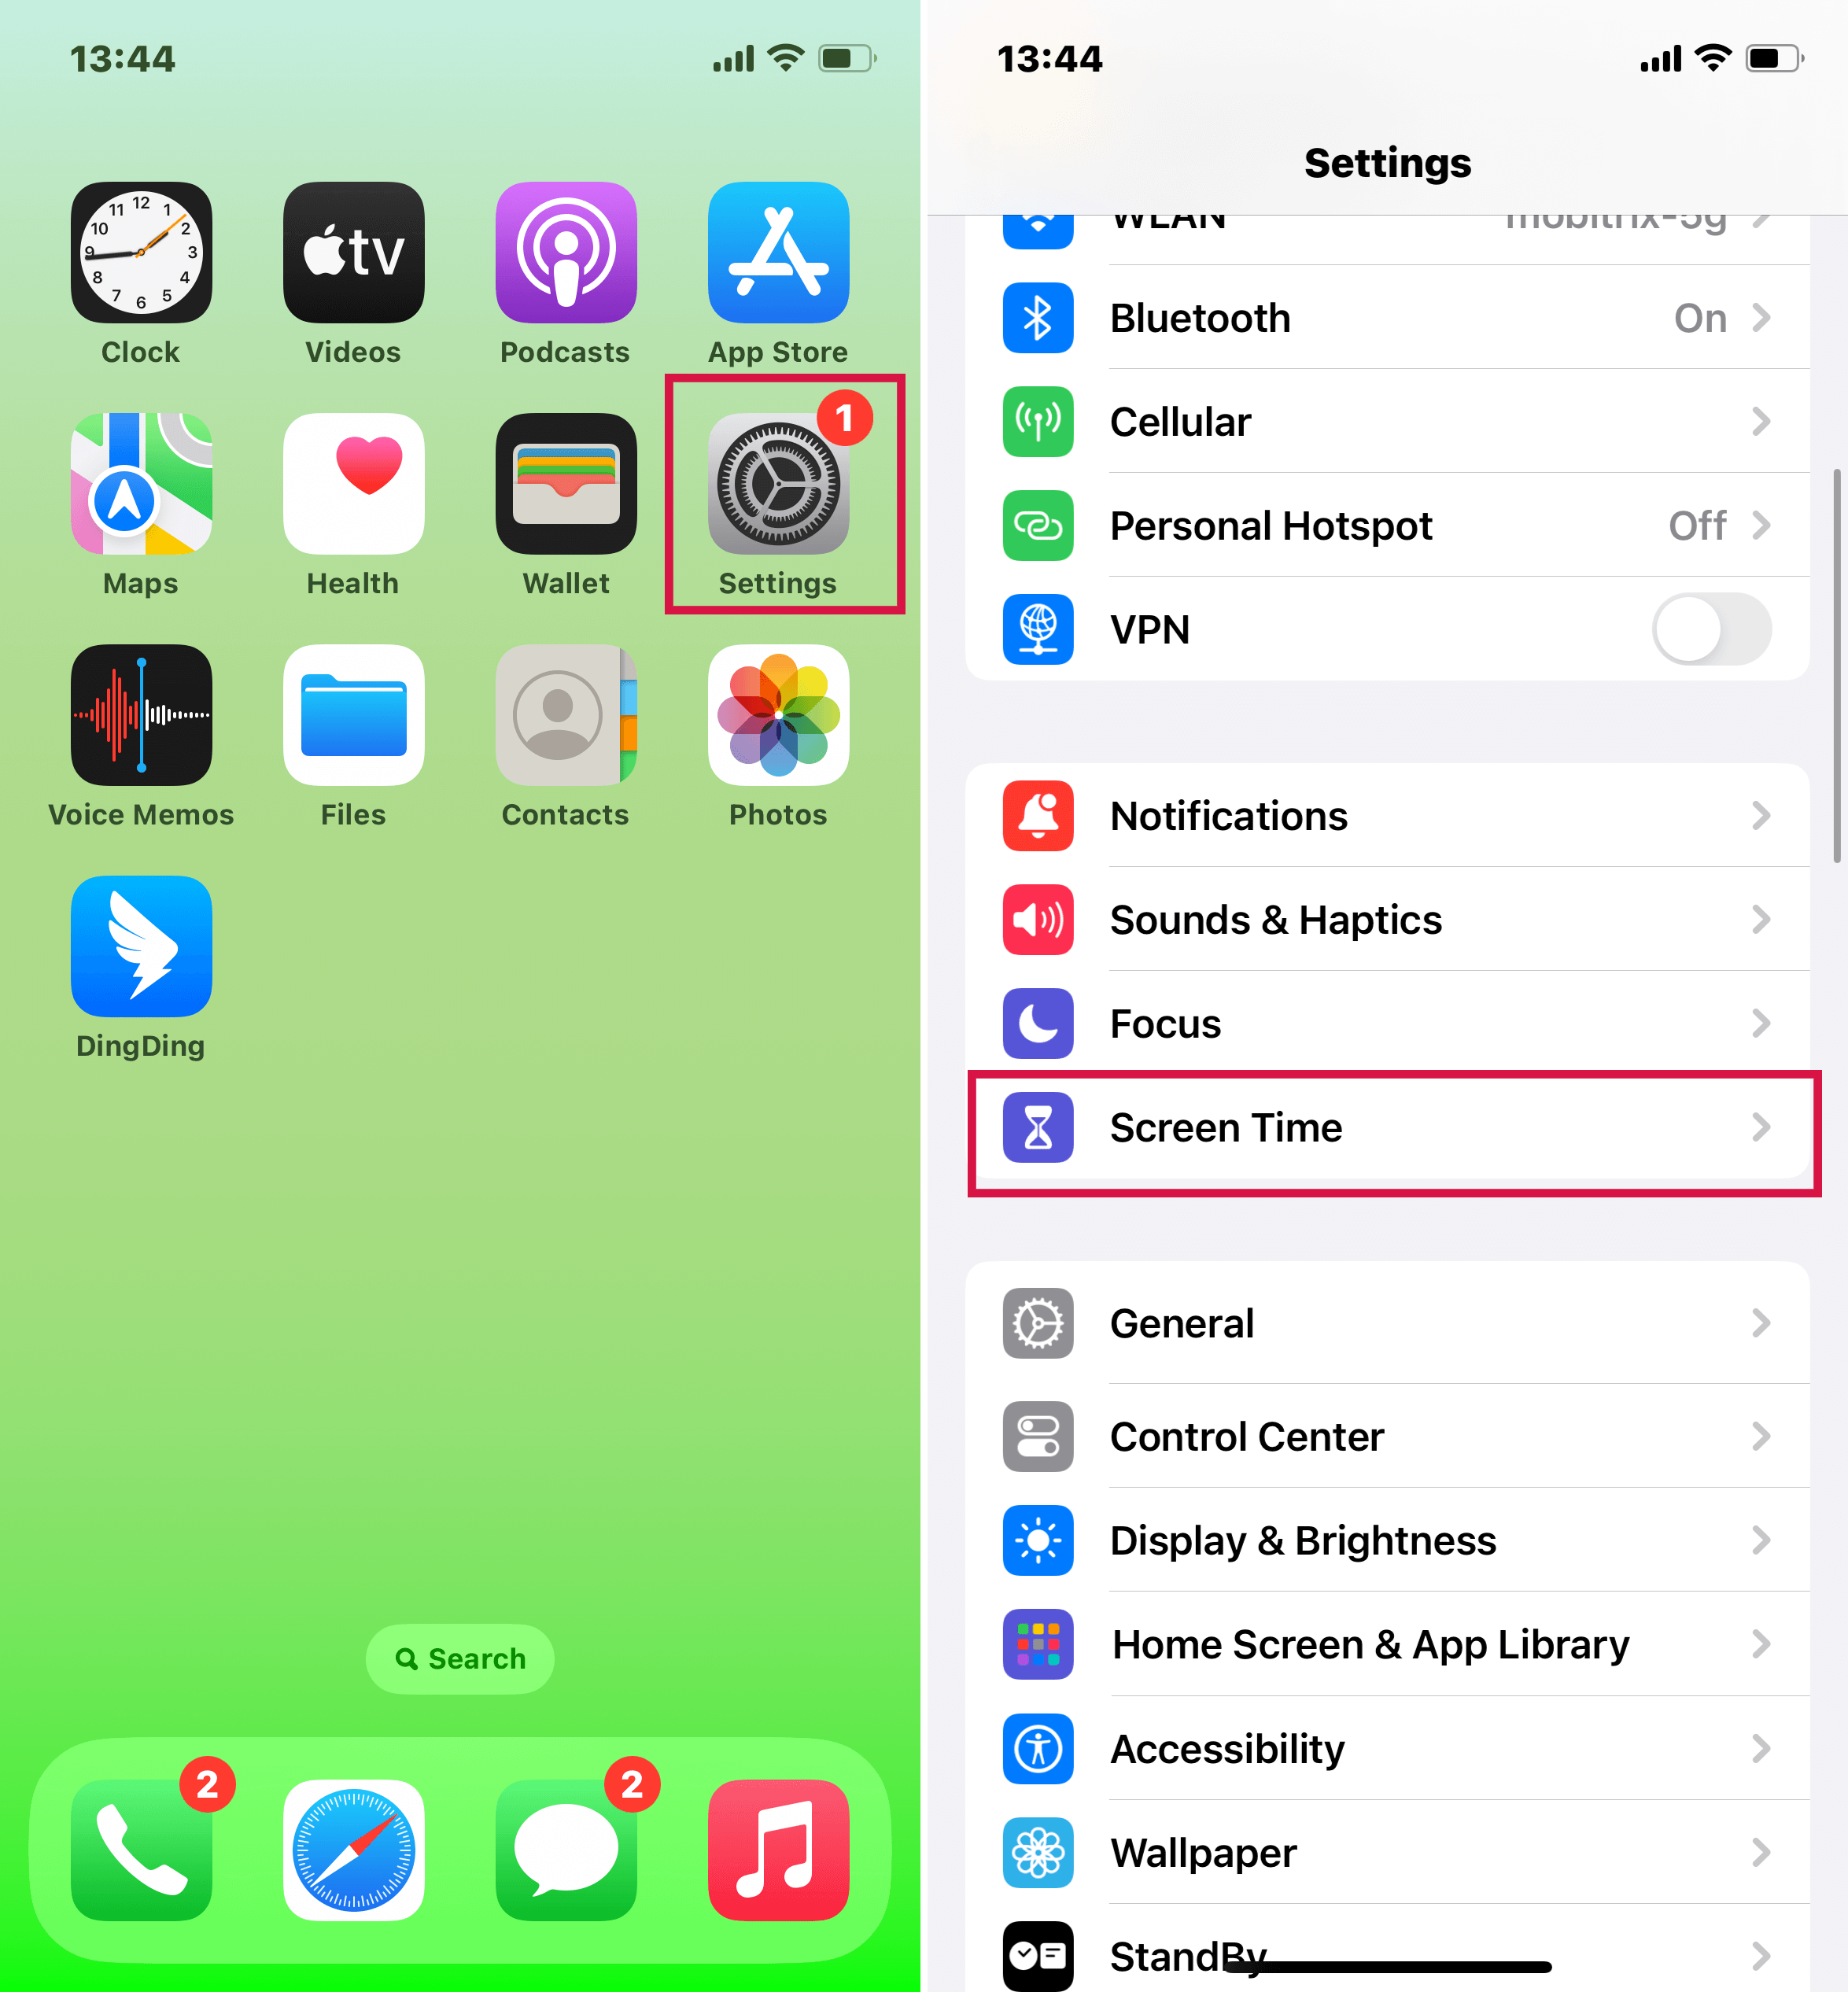 Find Screen Time within the Settings